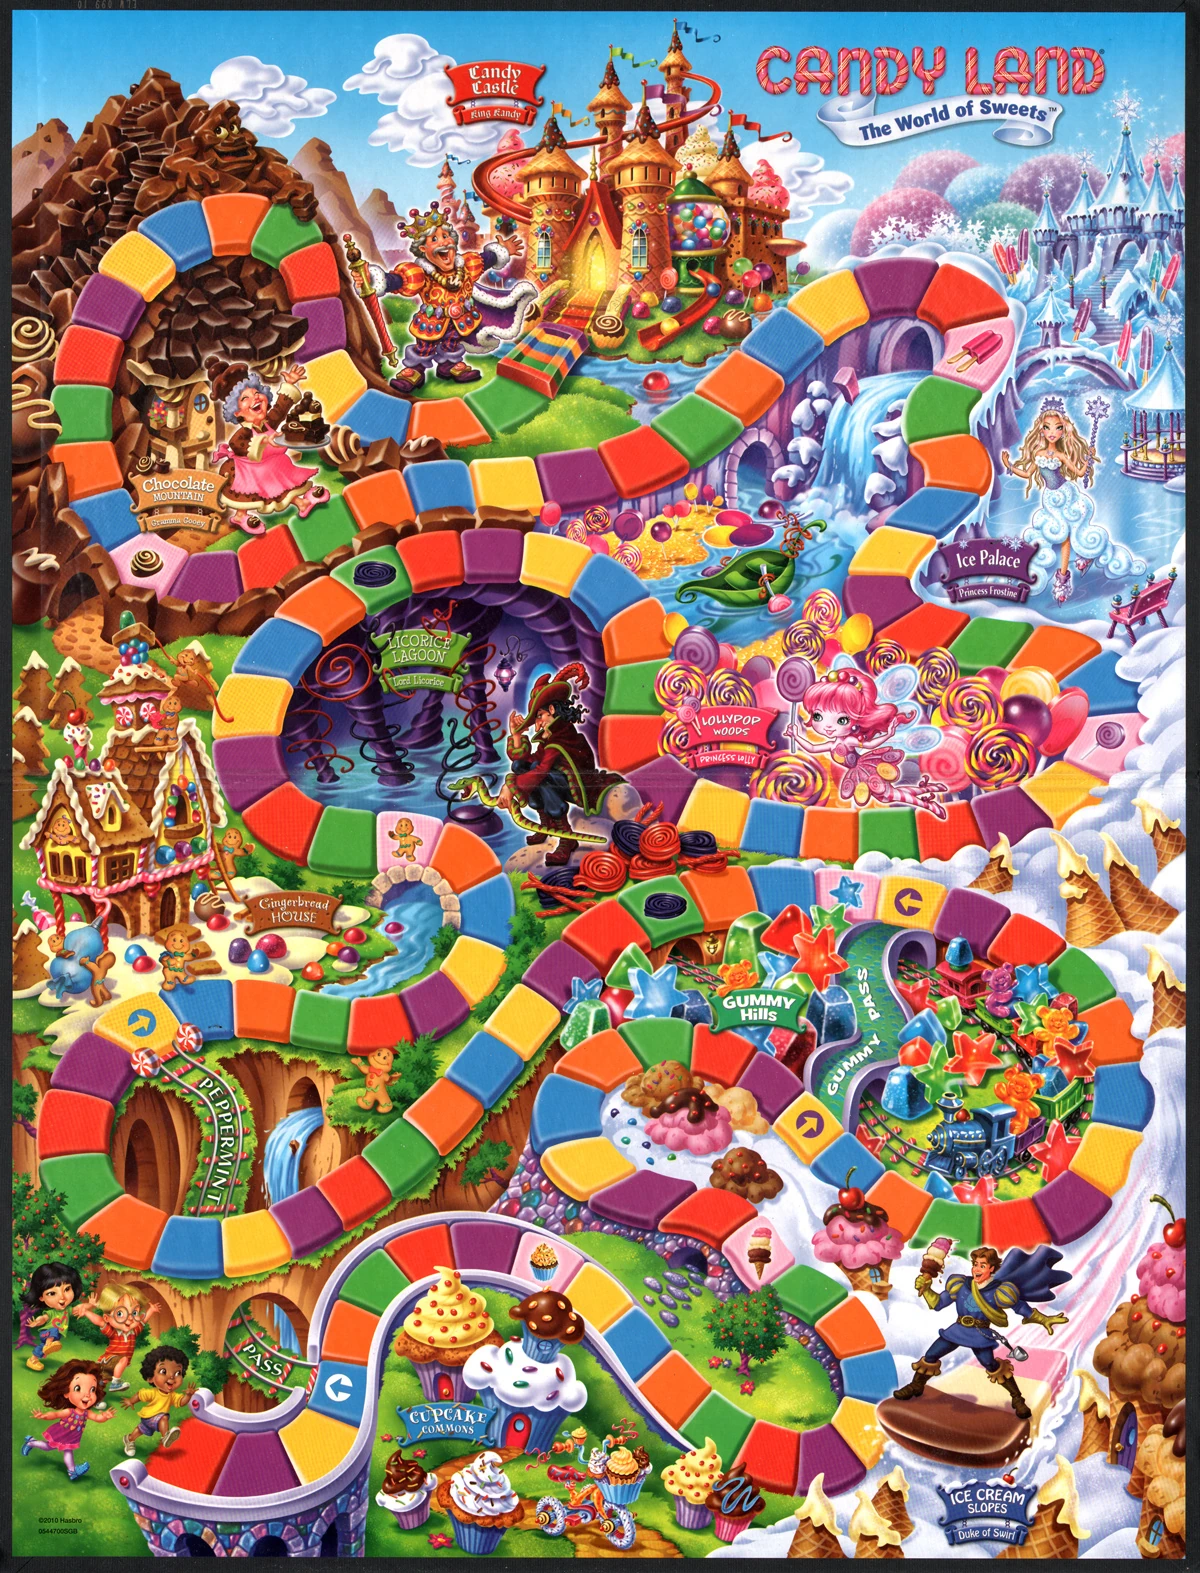 candy-land-2002-candy-land-wiki-fandom-peacecommission-kdsg-gov-ng